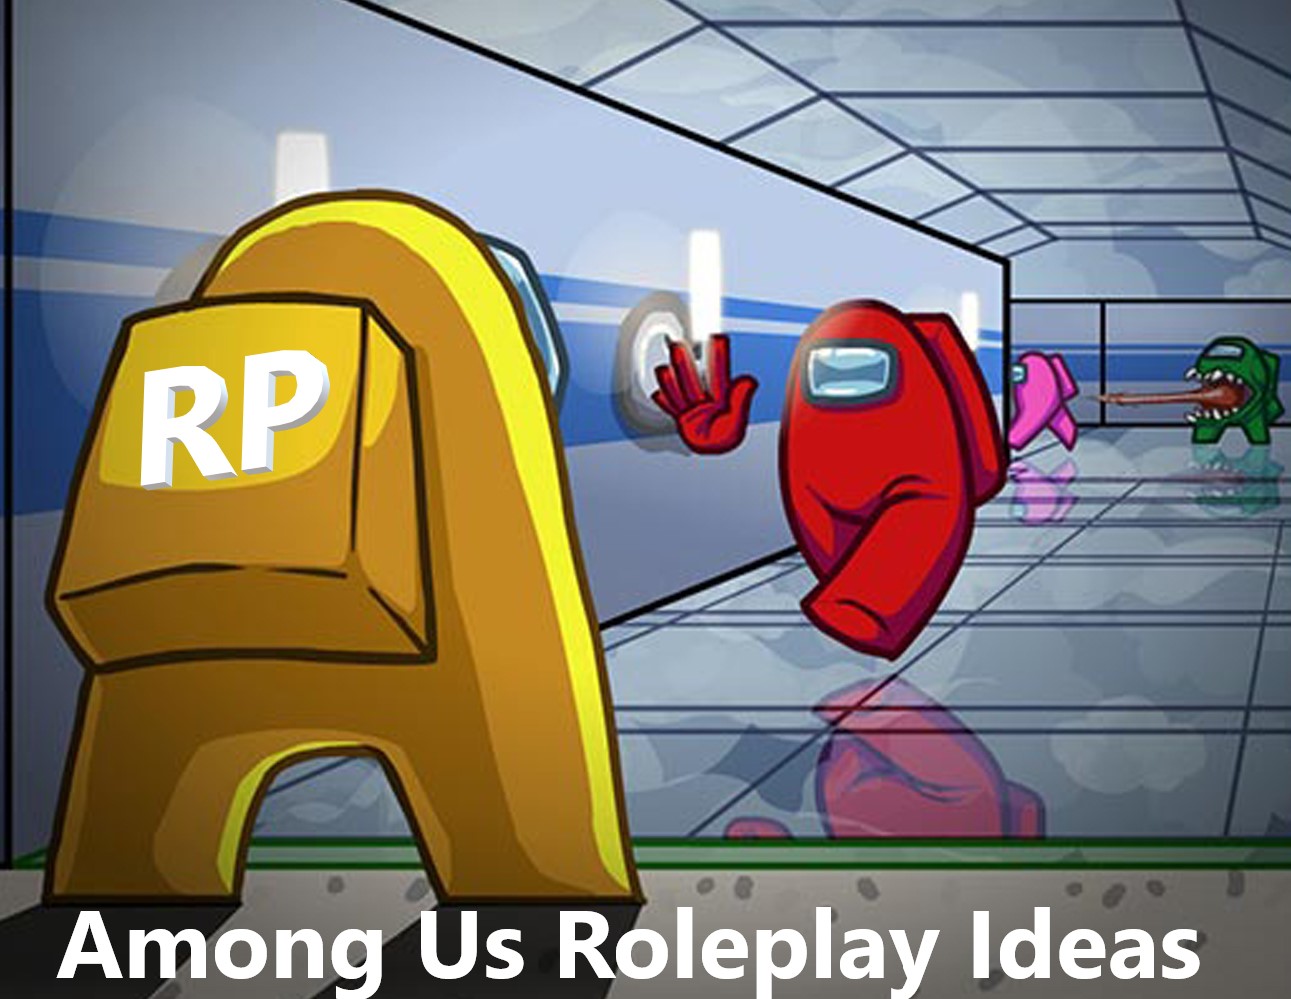 Among Us Roleplaying Story Lore Cyber Space Gamers - how to roleplay chat in roblox for other people